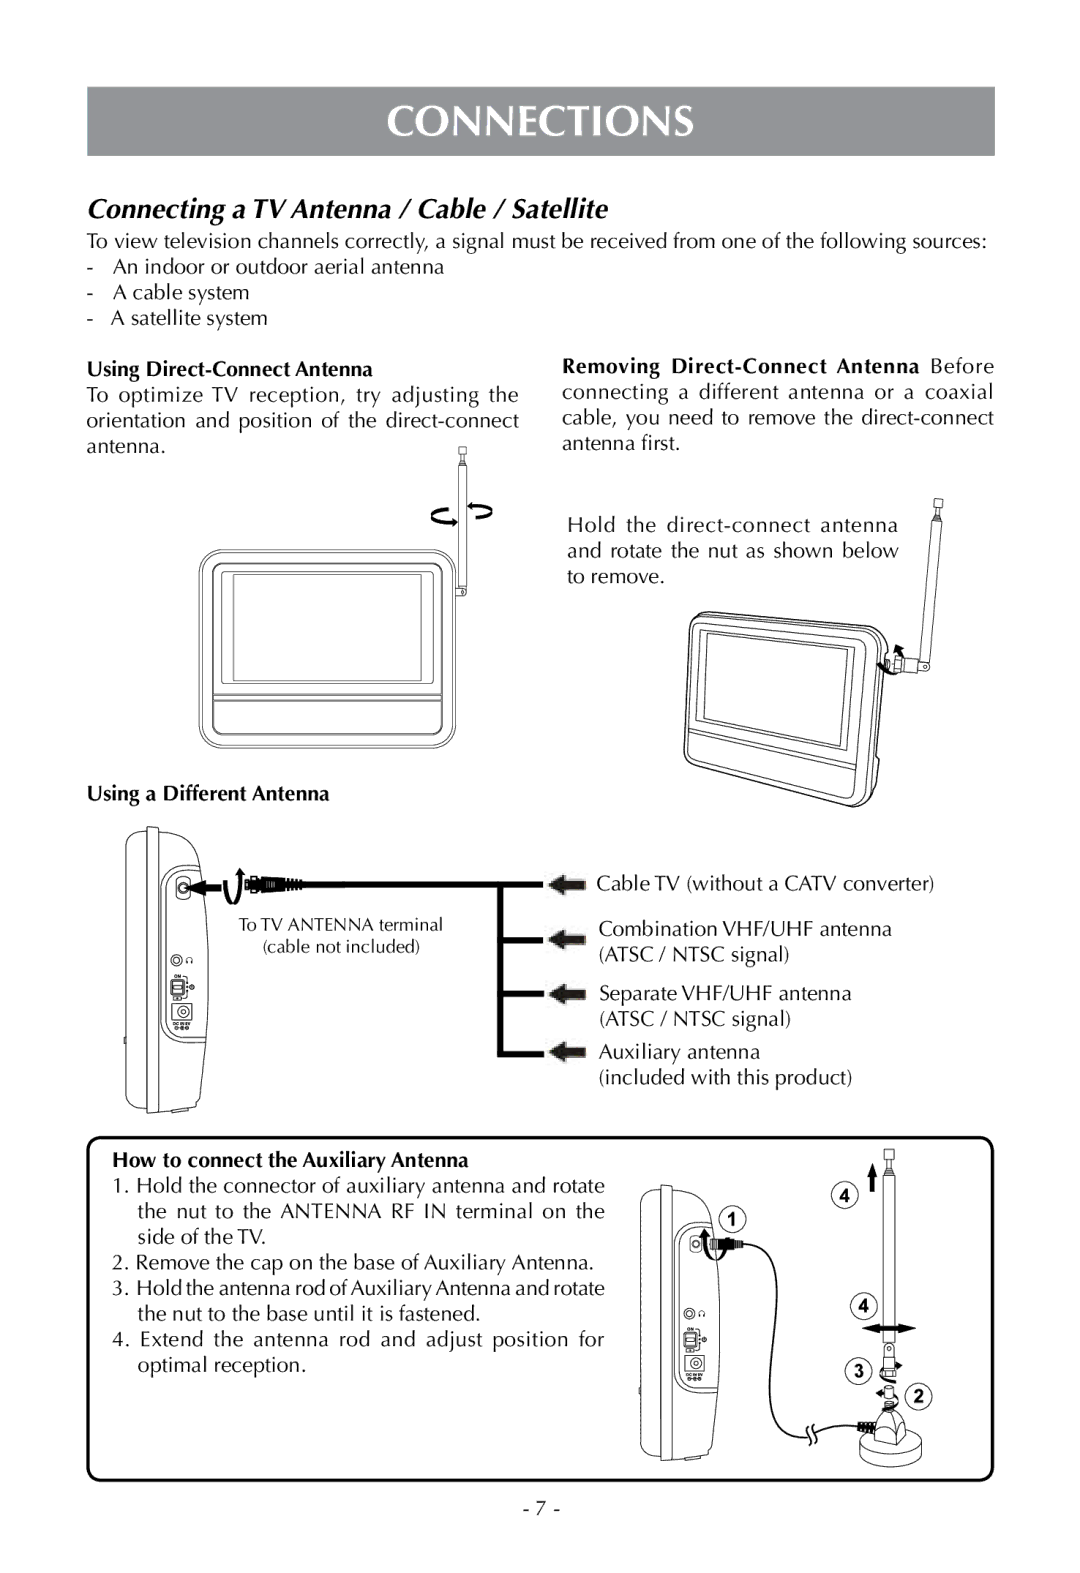 Venturer PLV16070 instruction manual Connections, Connecting a TV Antenna / Cable / Satellite, Using a Different Antenna 